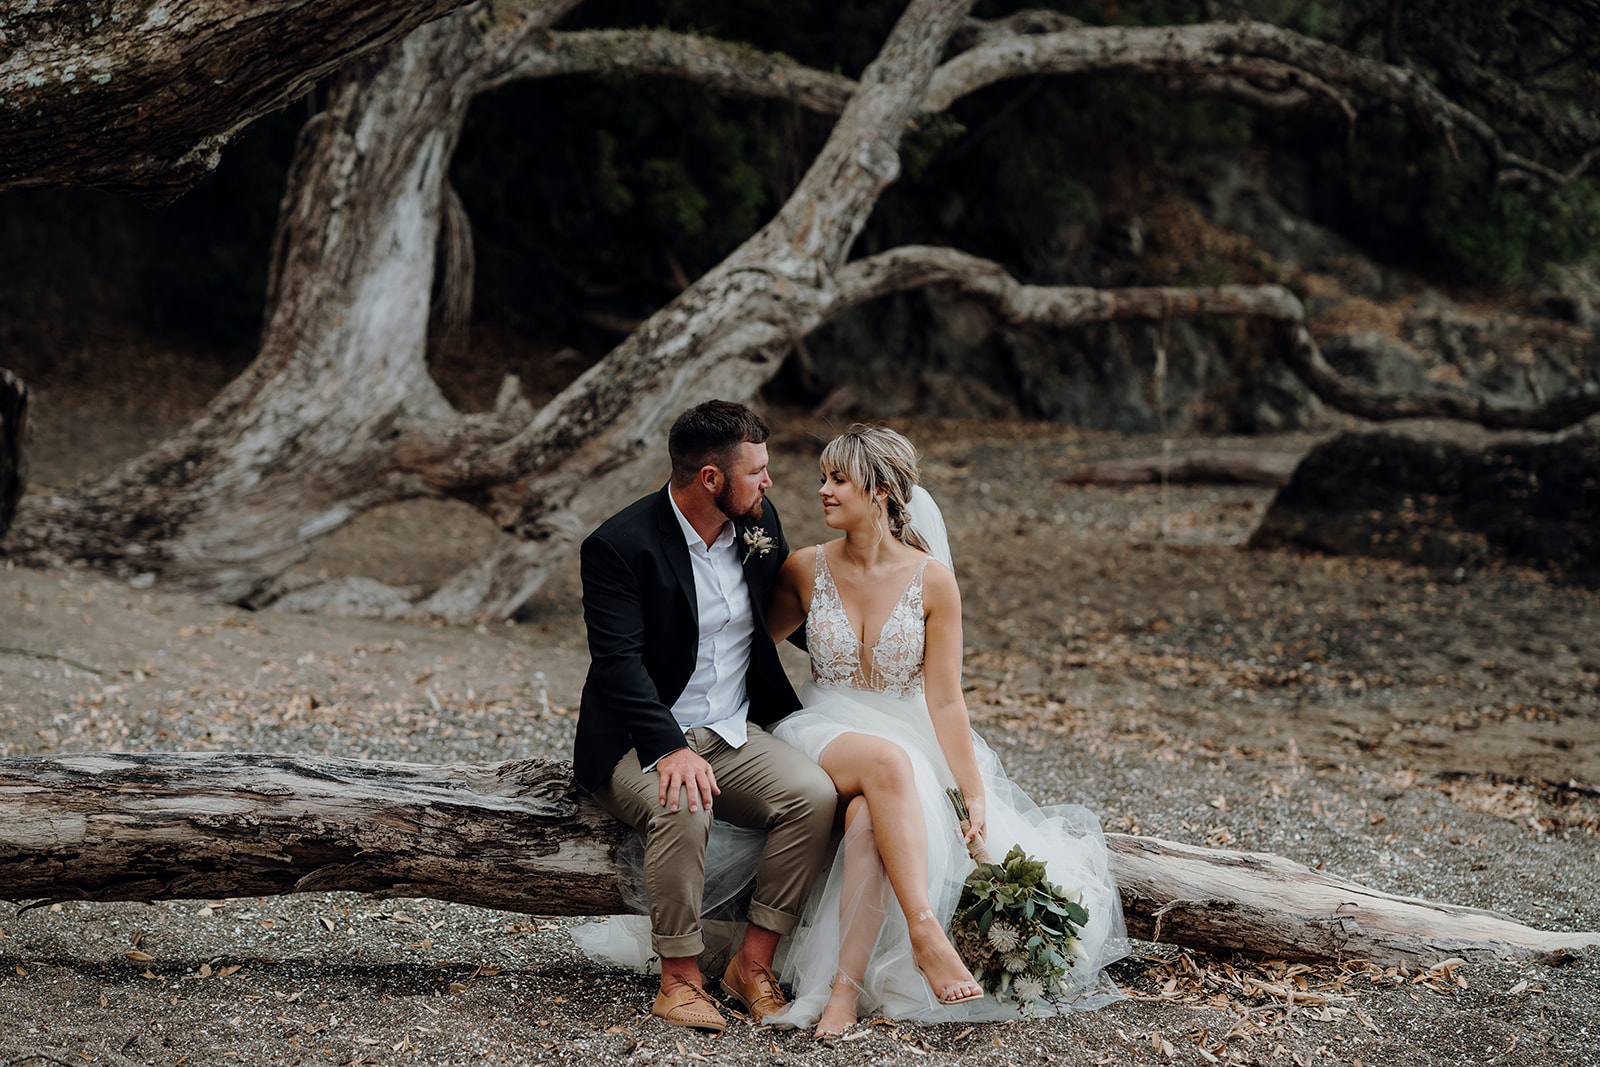 A bride and groom sitting on a log on a beach with dark sand while being photographed by Waikato photographer Haley Adele Photography during their wedding portrait photoshoot